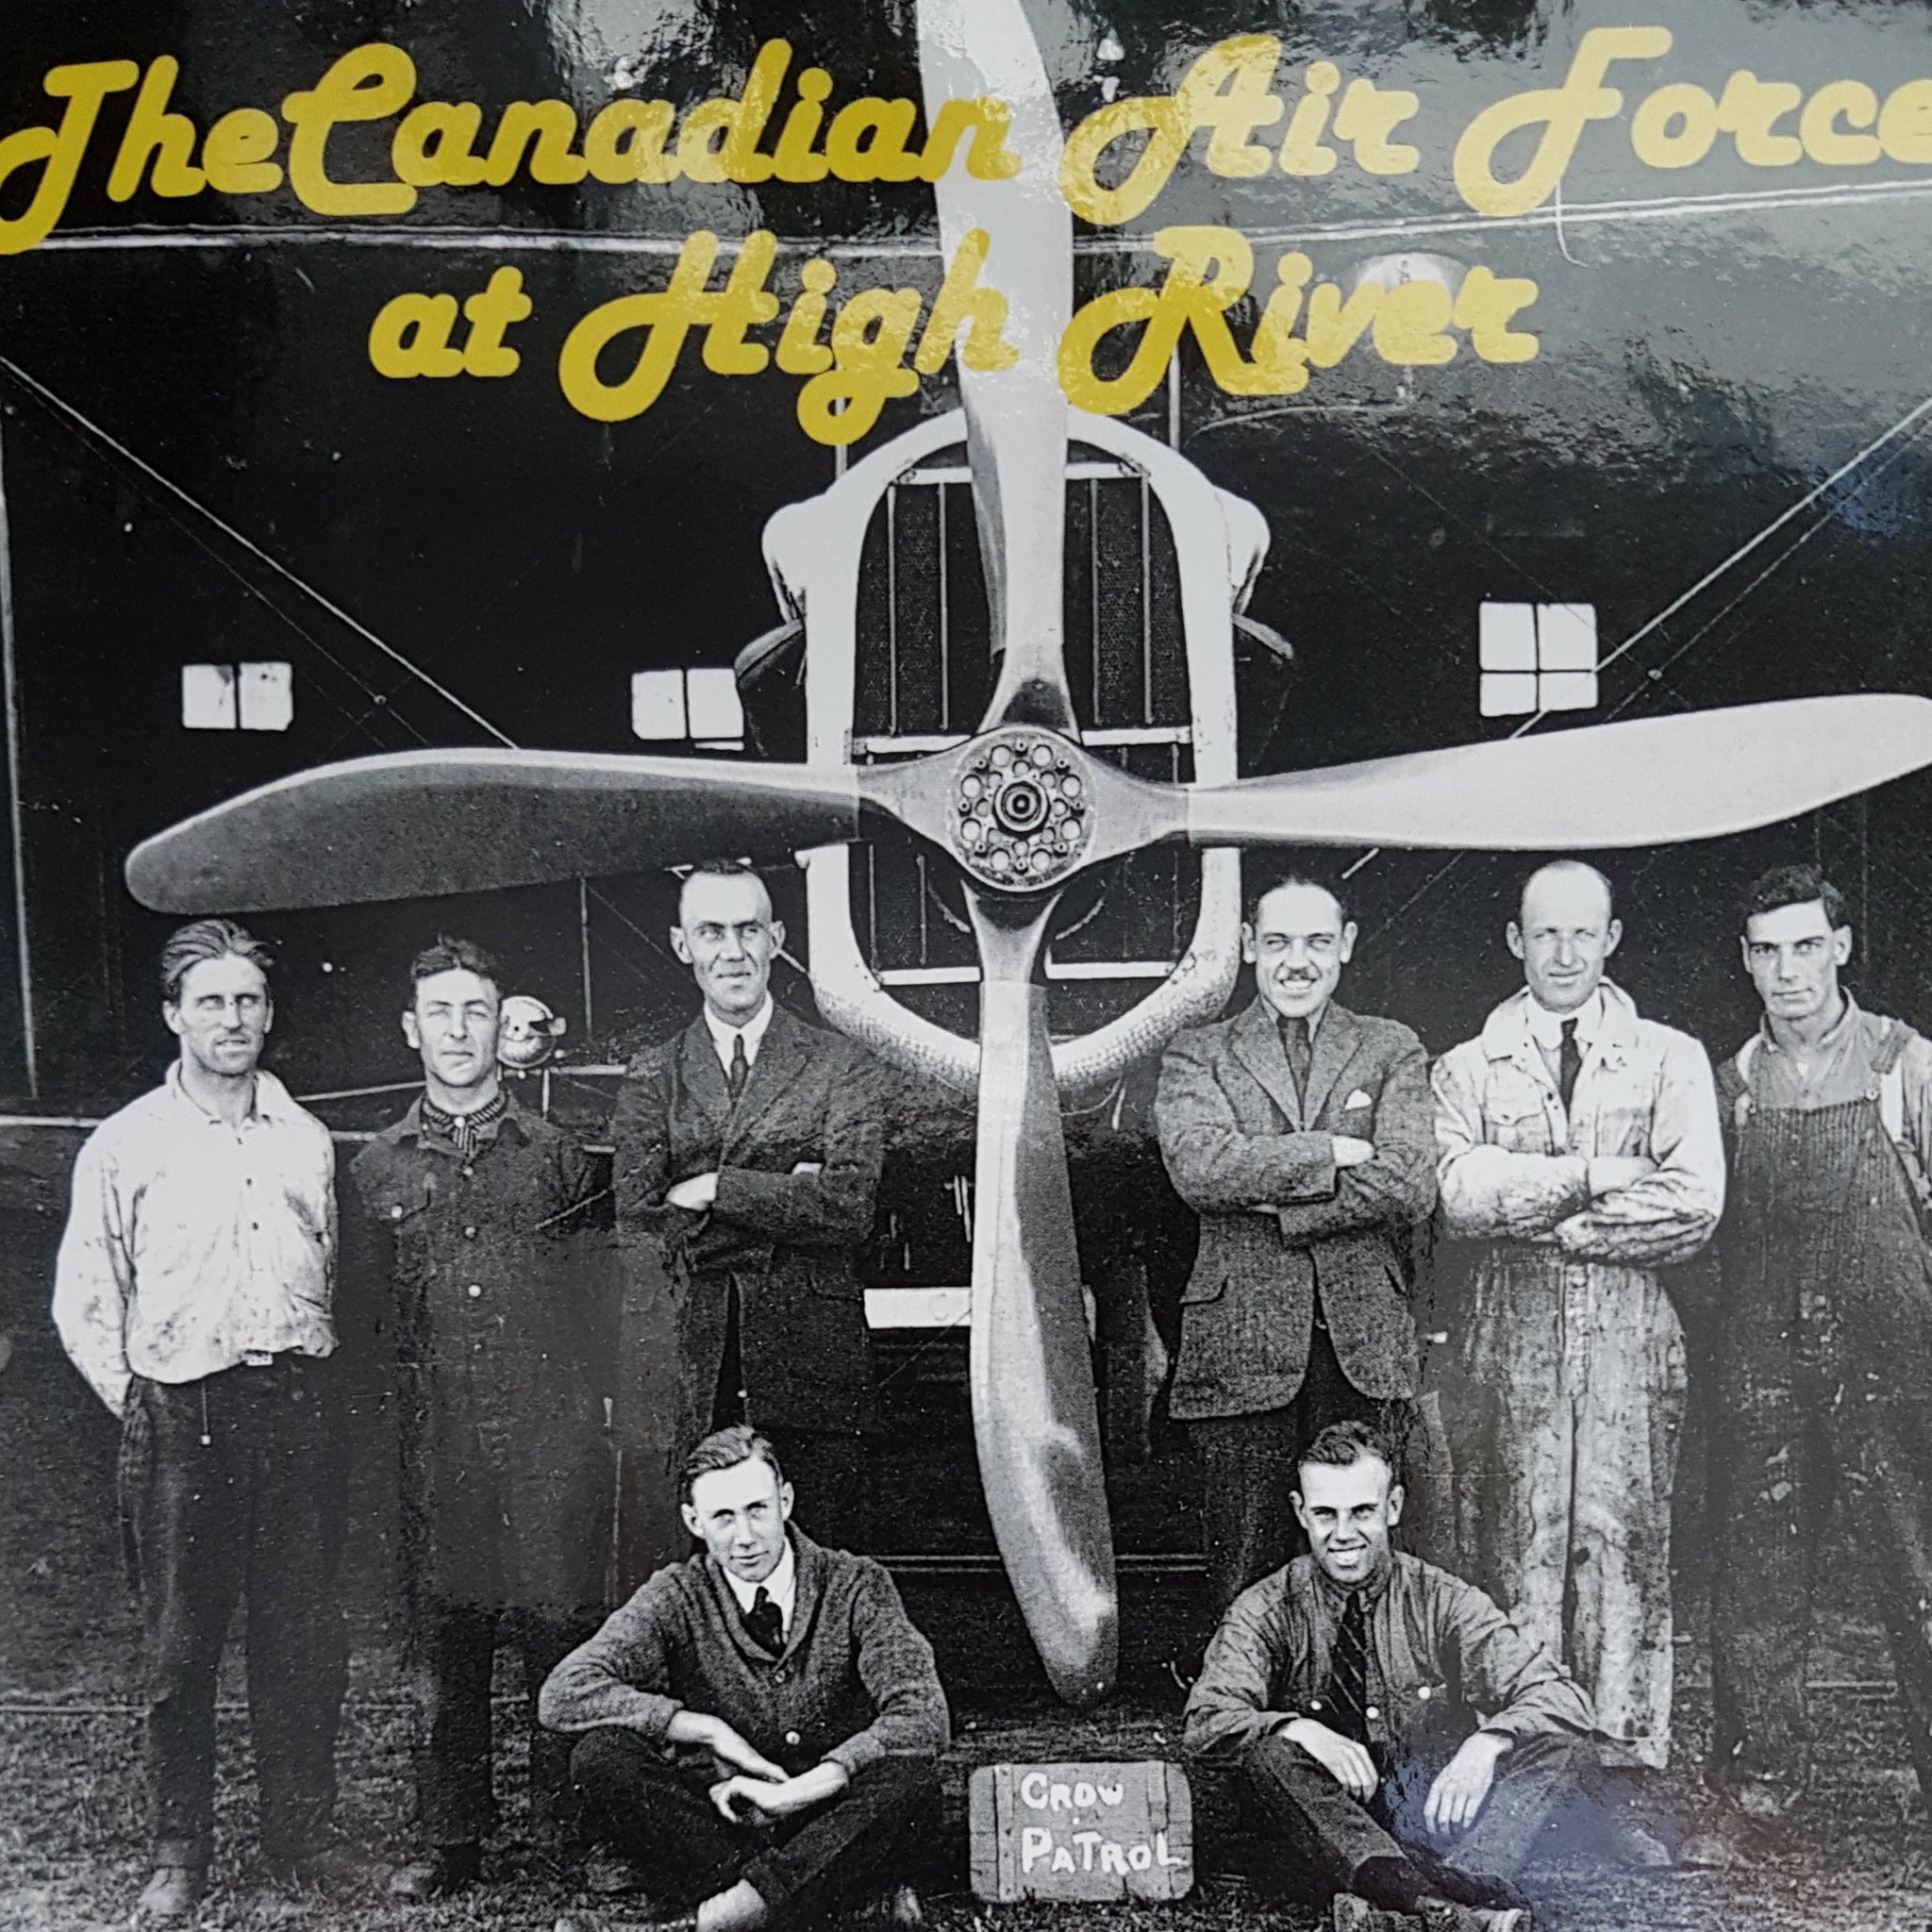 The Canadian Air Force at High River  (by Dave Birrell)